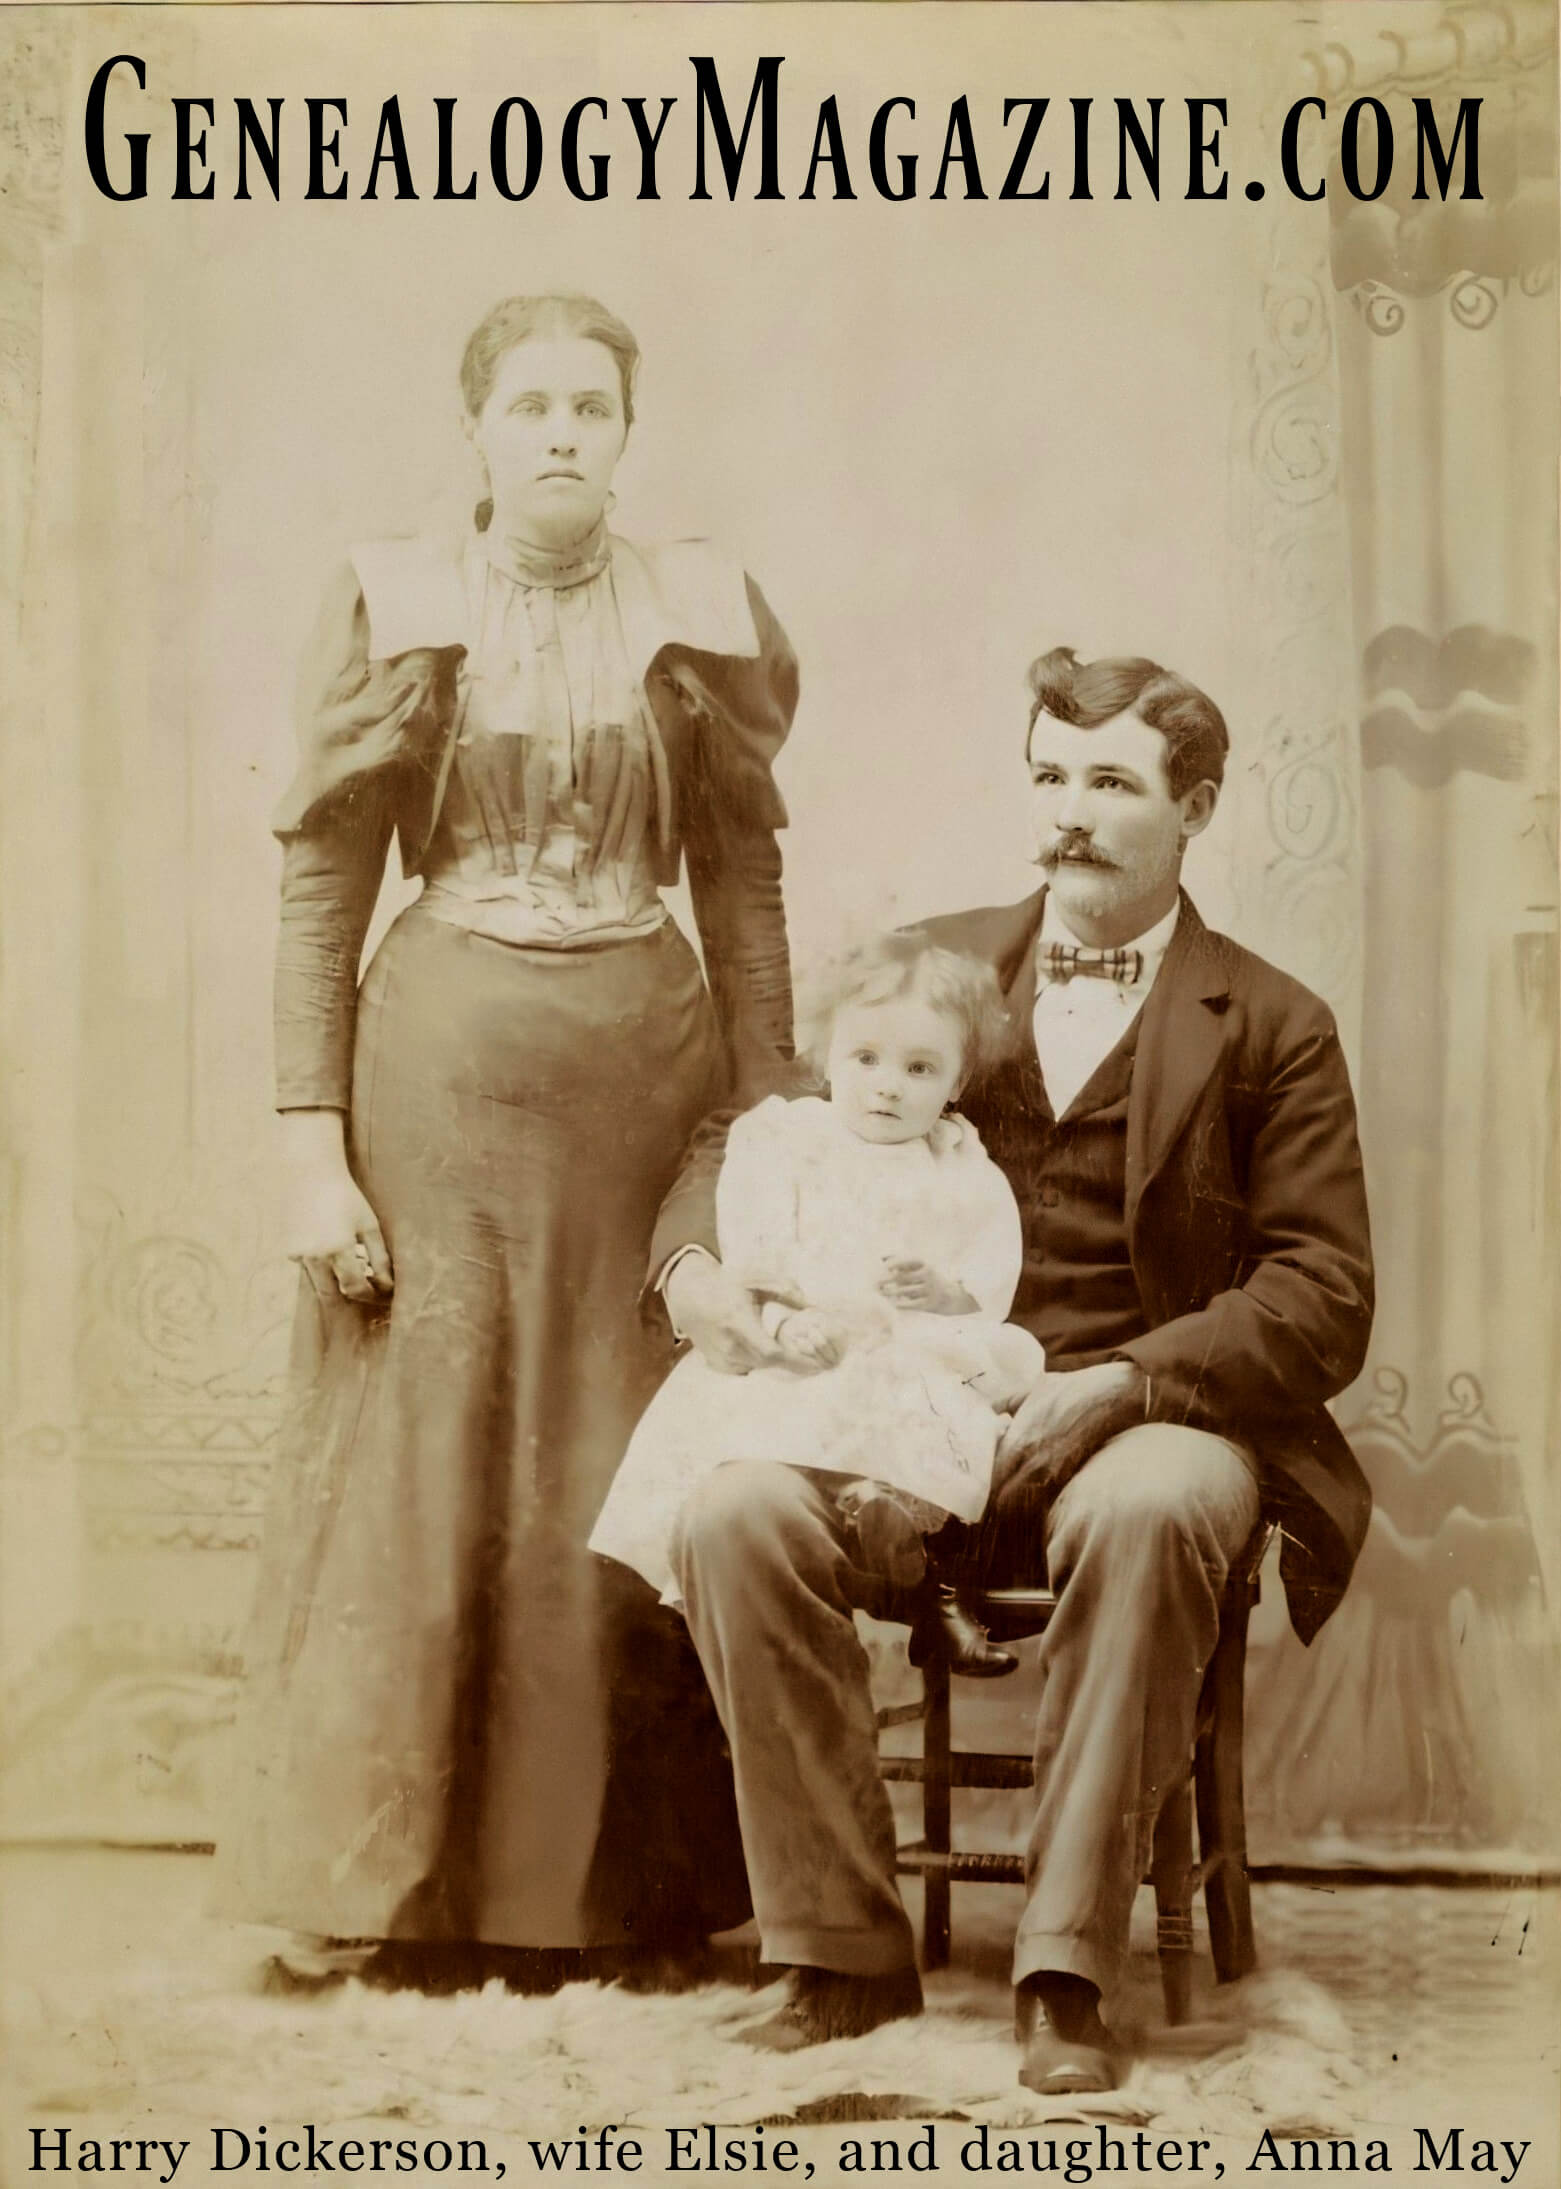 Harry Dickerson, Elsie Dickerson, and Anna May Dickerson